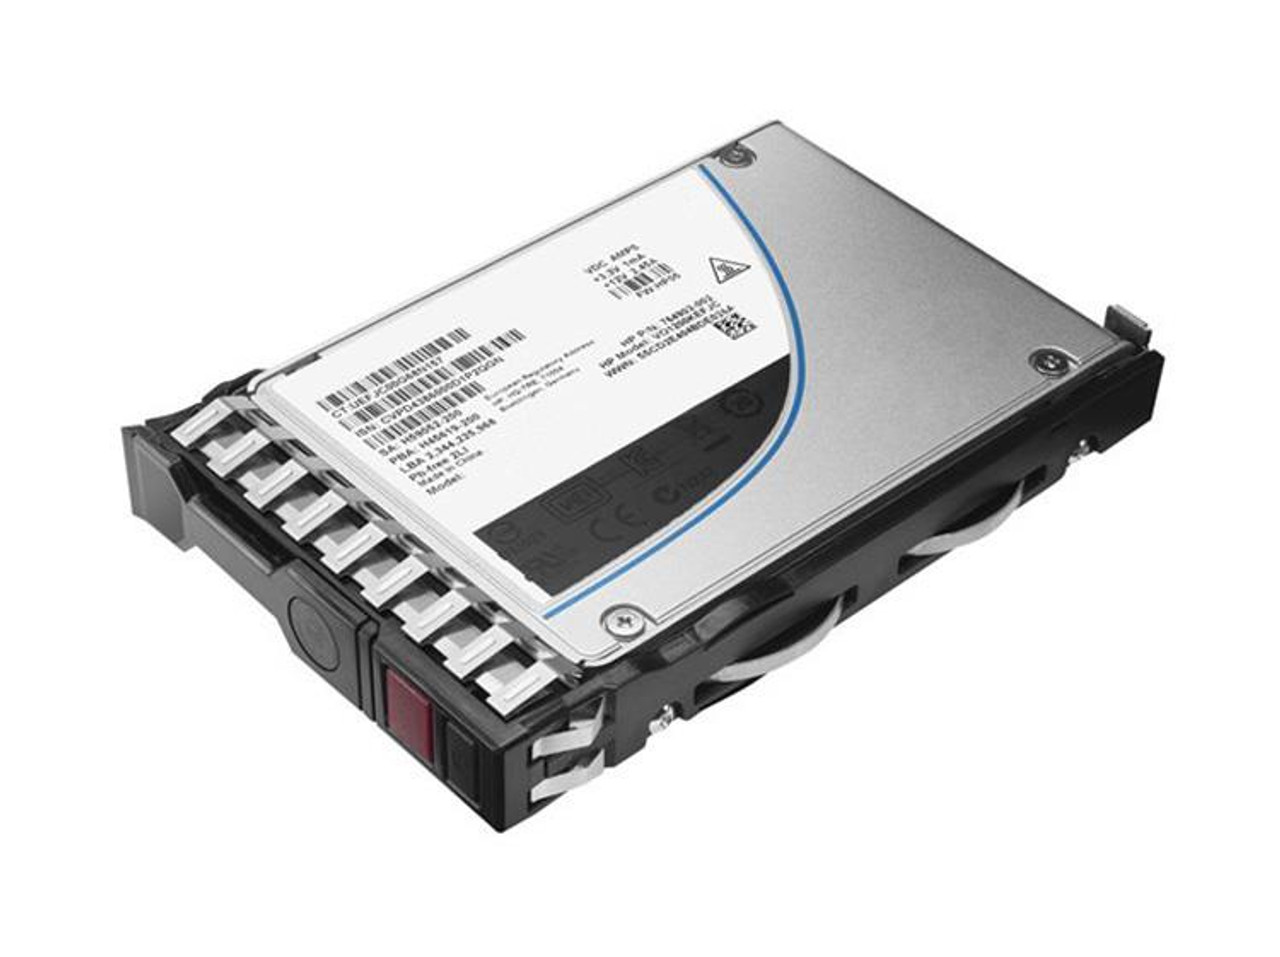 P09102-B21 HPE 1.6TB TLC SAS 12Gbps Hot Swap Write Intensive 2.5-inch Internal Solid State Drive (SSD) with Smart Carrier